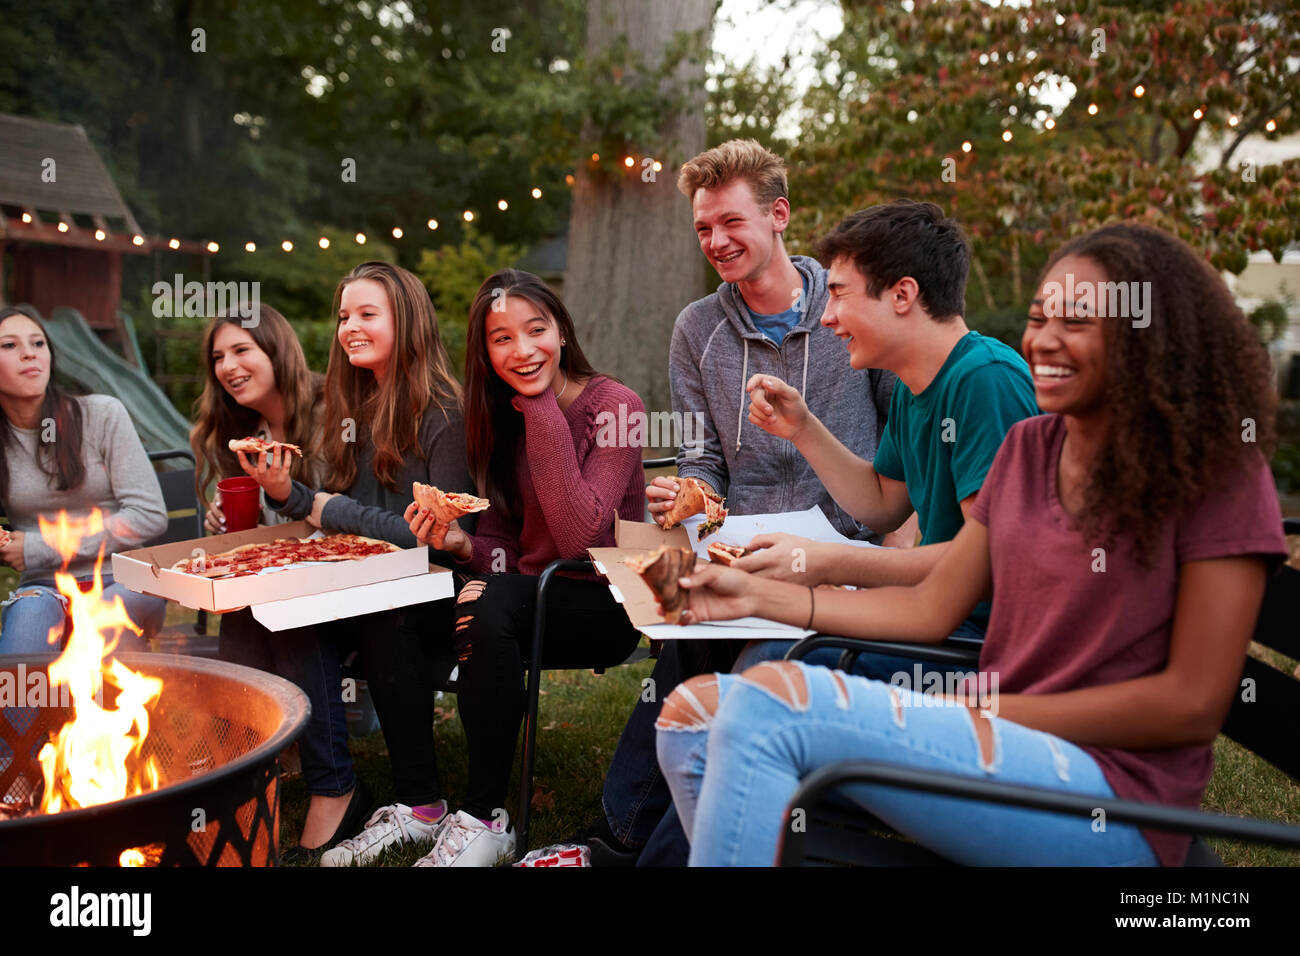 Teenagers at a fire pit eating take-away pizzas, close up Stock Photo